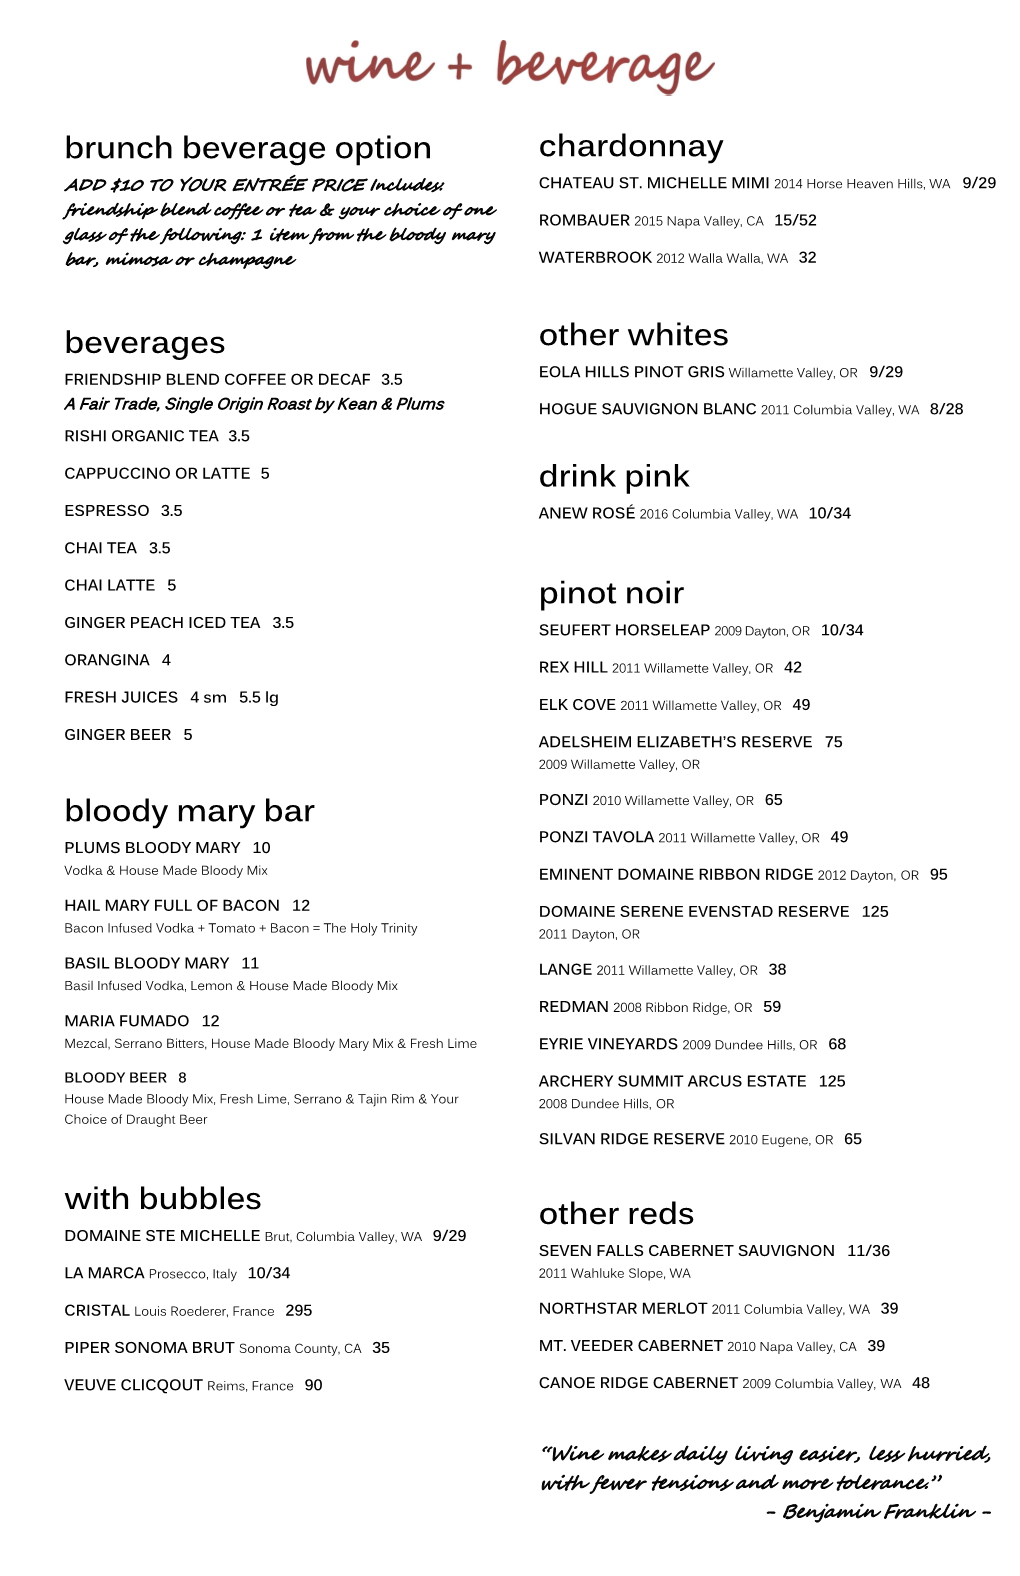 Brunch Beverage Option Beverages Bloody Mary Bar with Bubbles Chardonnay Other Whites Drink Pink Pinot Noir Other Reds